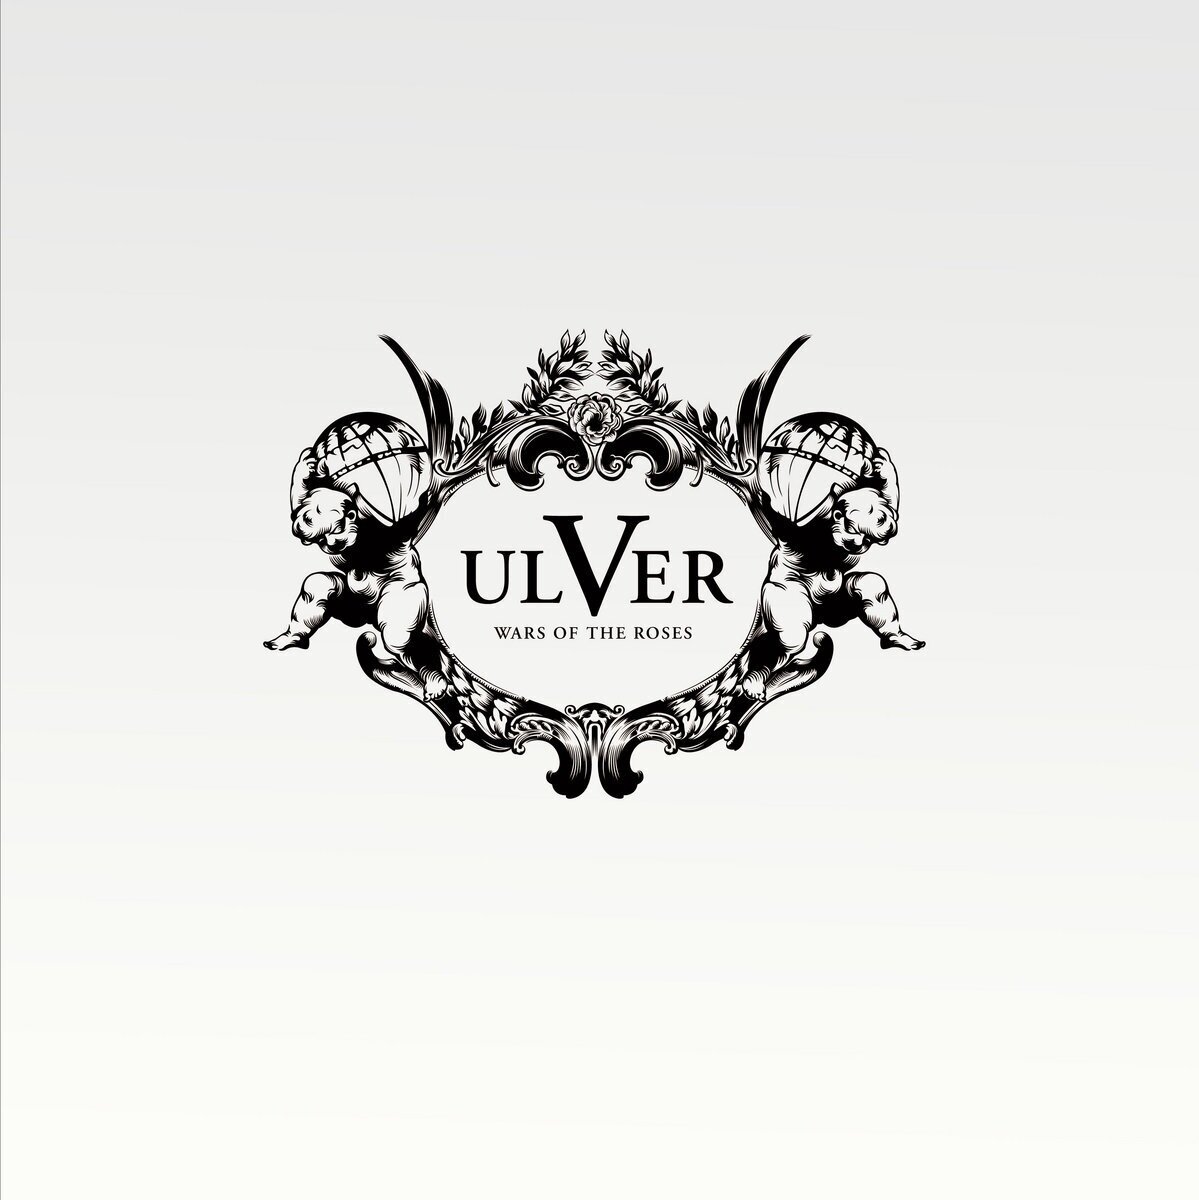 Wars of the roses - ULVER